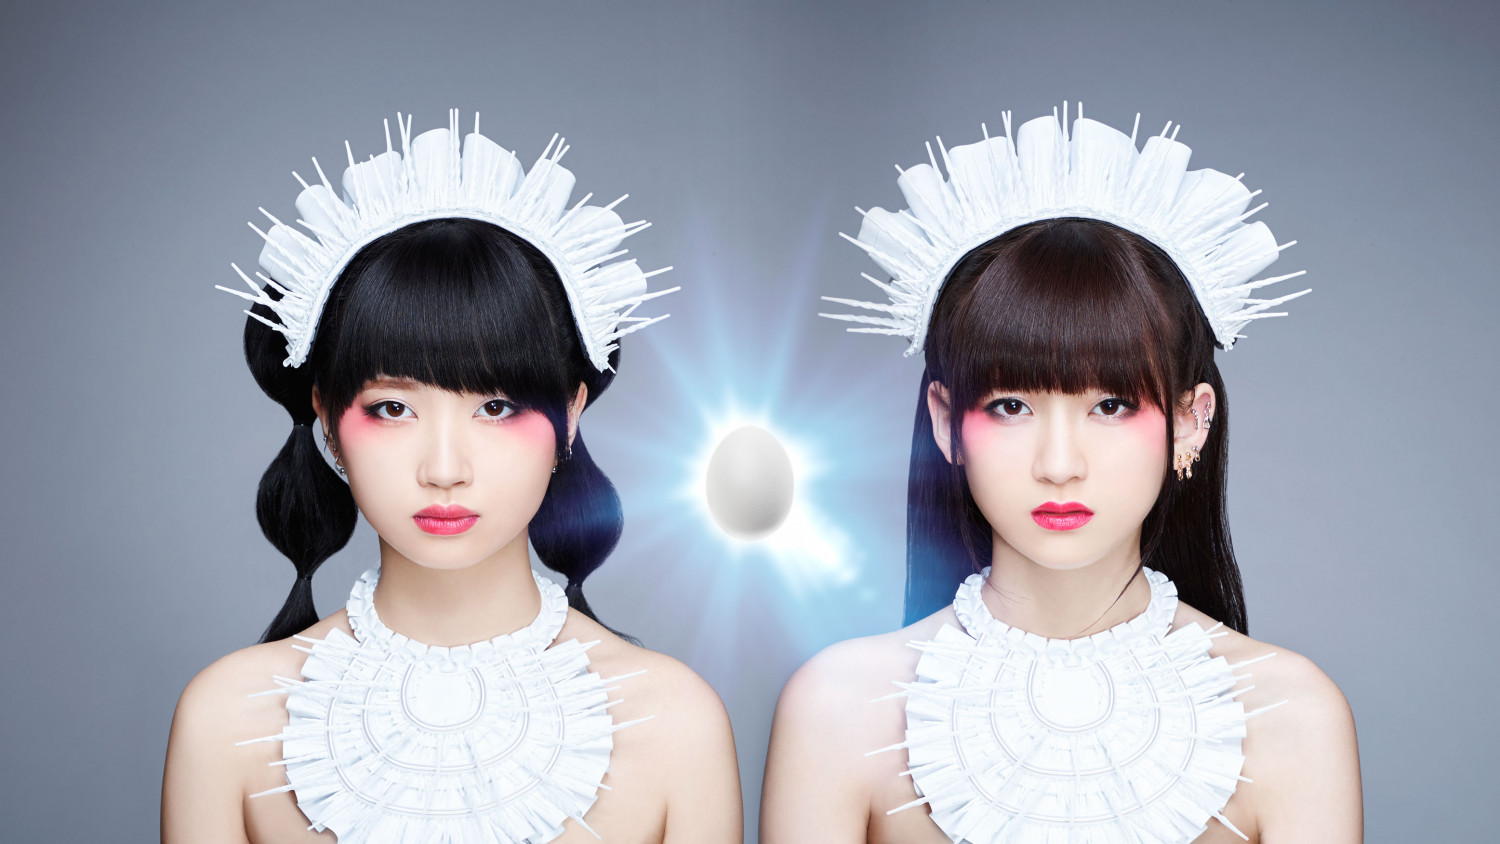 LADYBABY Returns Without Ladybeard? The Idol Formerly Known As LADYBABY is Born!